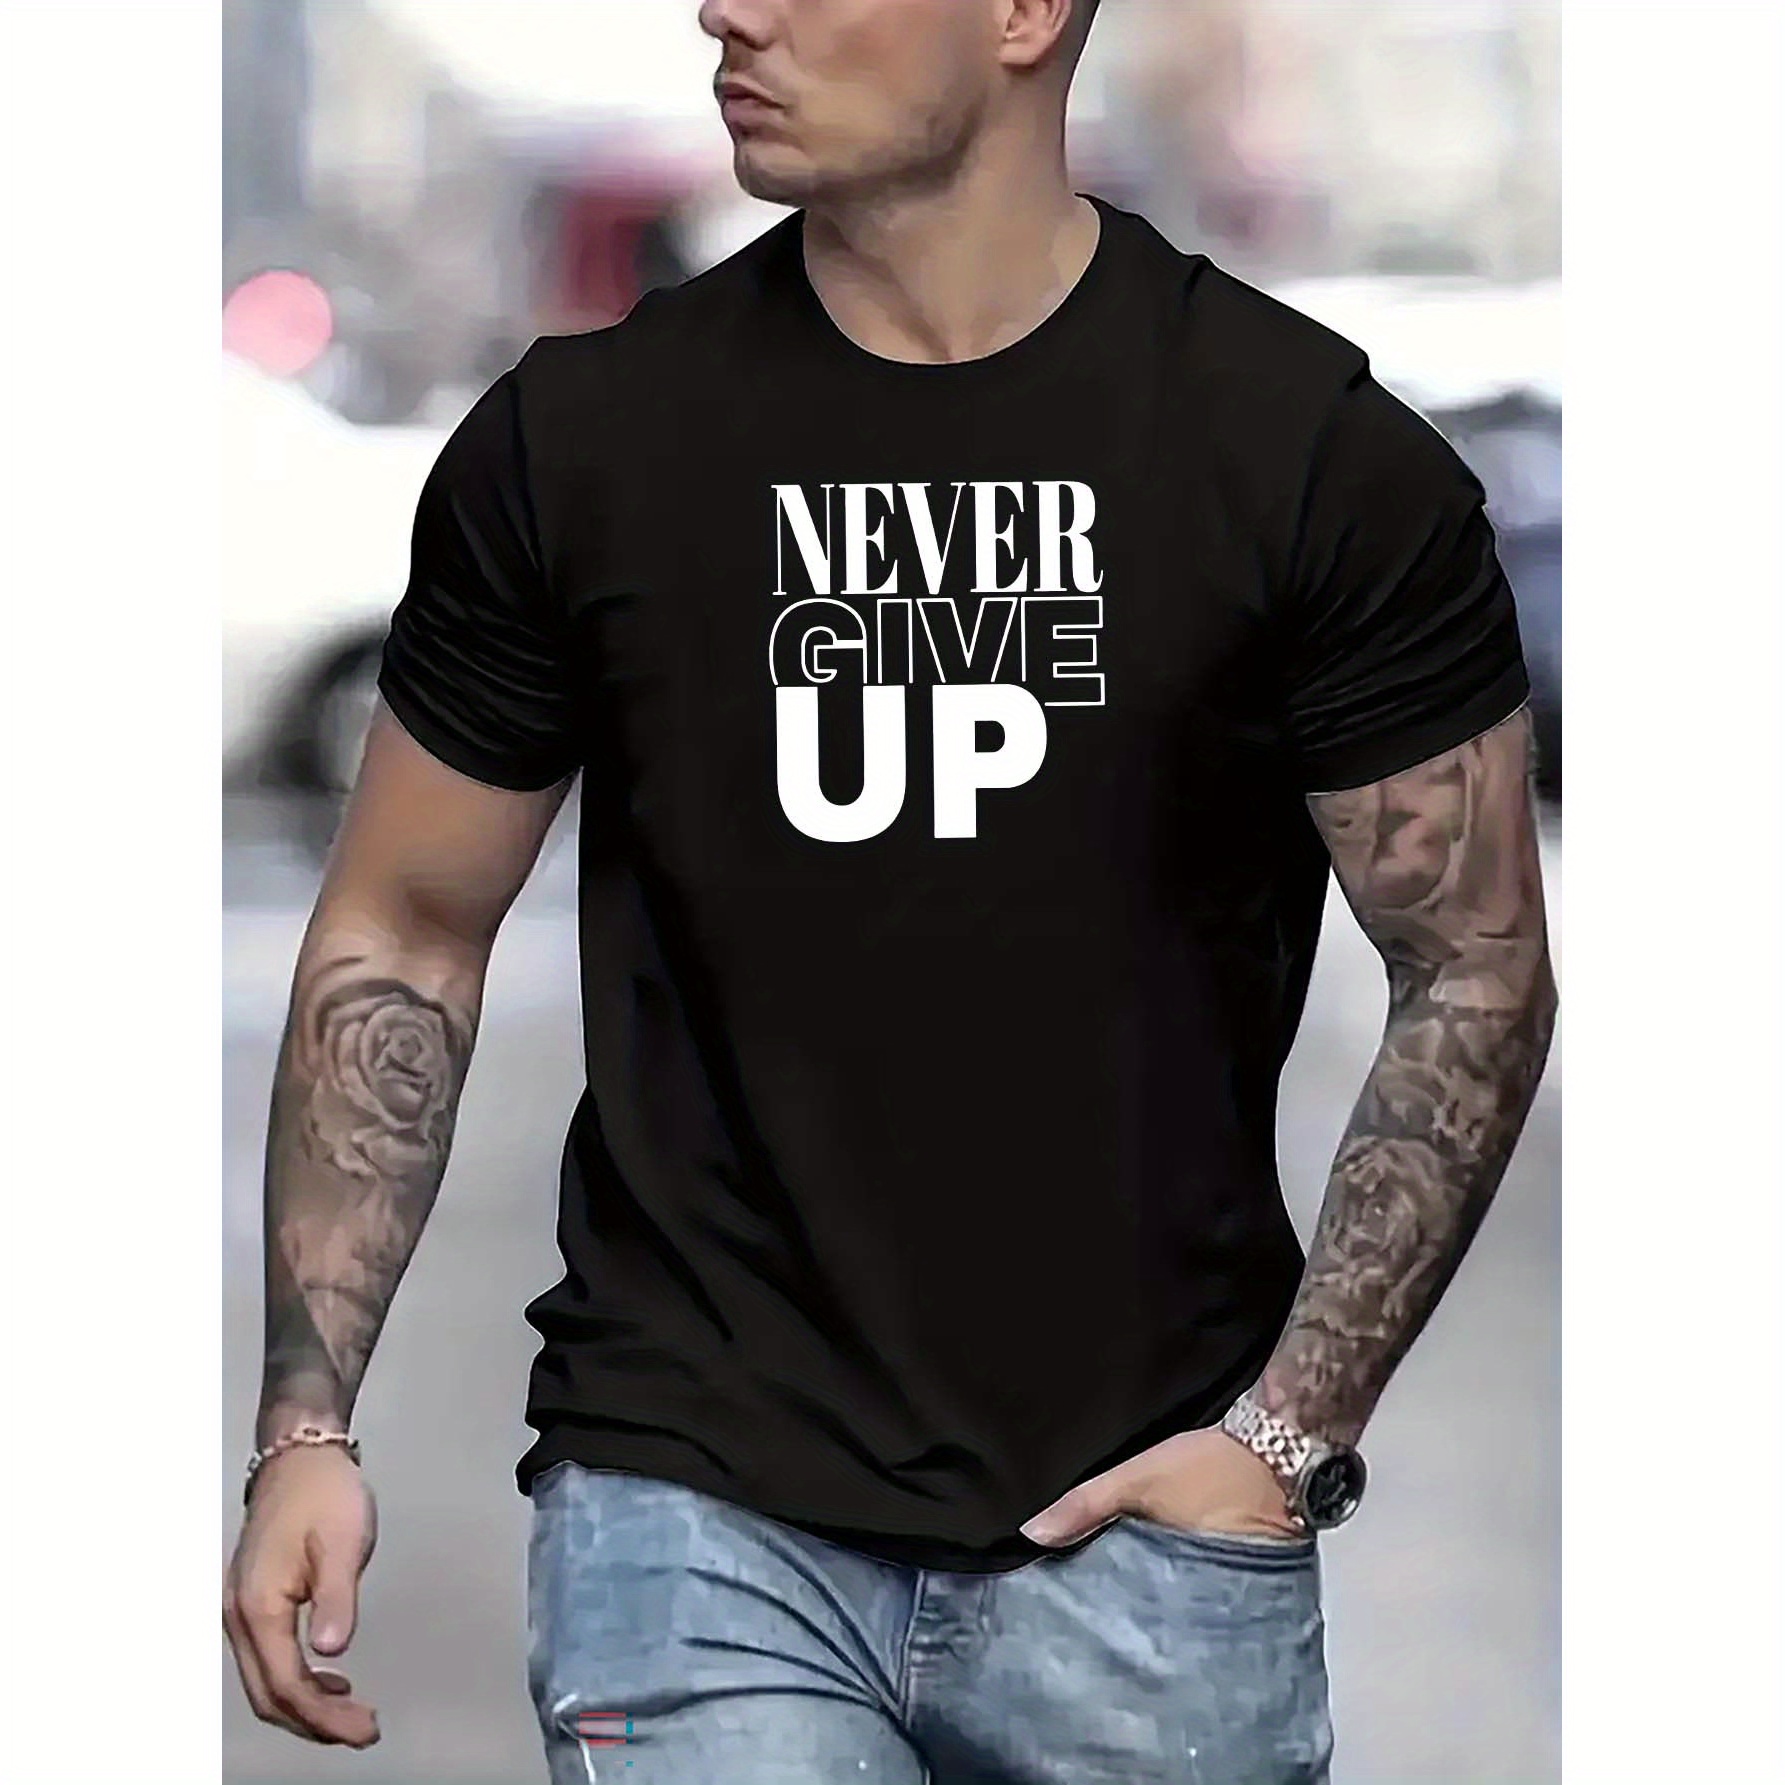 

Never Give Up Print, Men's Graphic Design Crew Neck Active T-shirt, Casual Comfy Tees Tshirts For Summer, Men's Clothing Tops For Daily Gym Workout Running